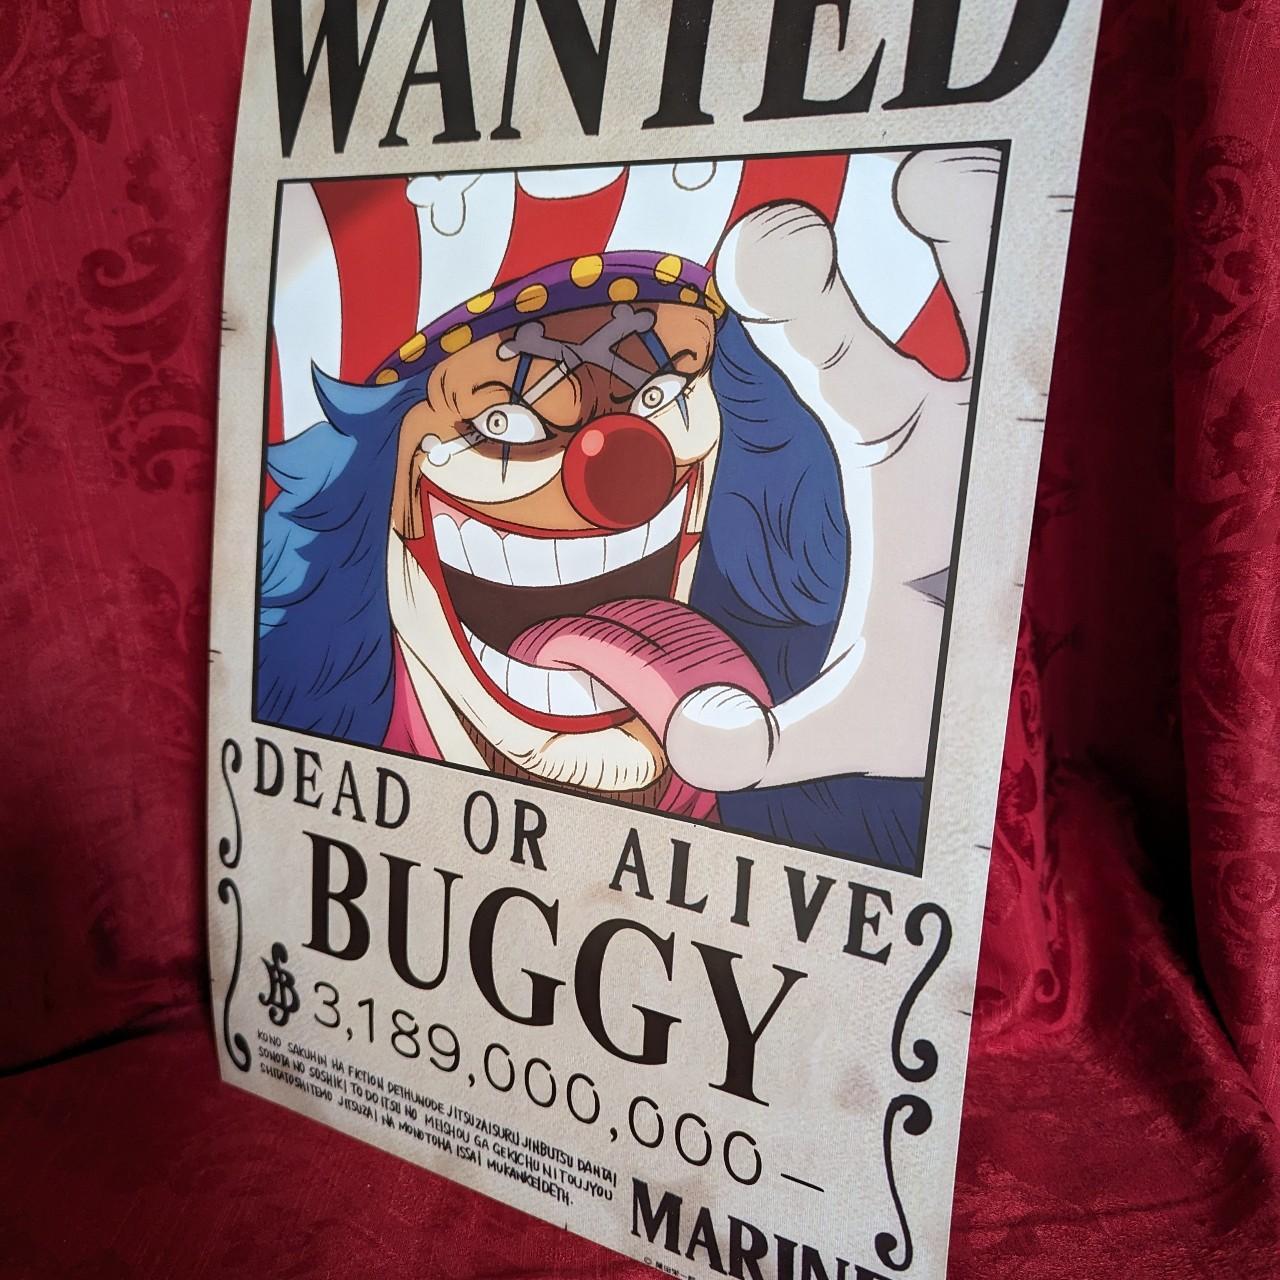 Buggy the clown one piece poster wanted Poster by Anime One Piece